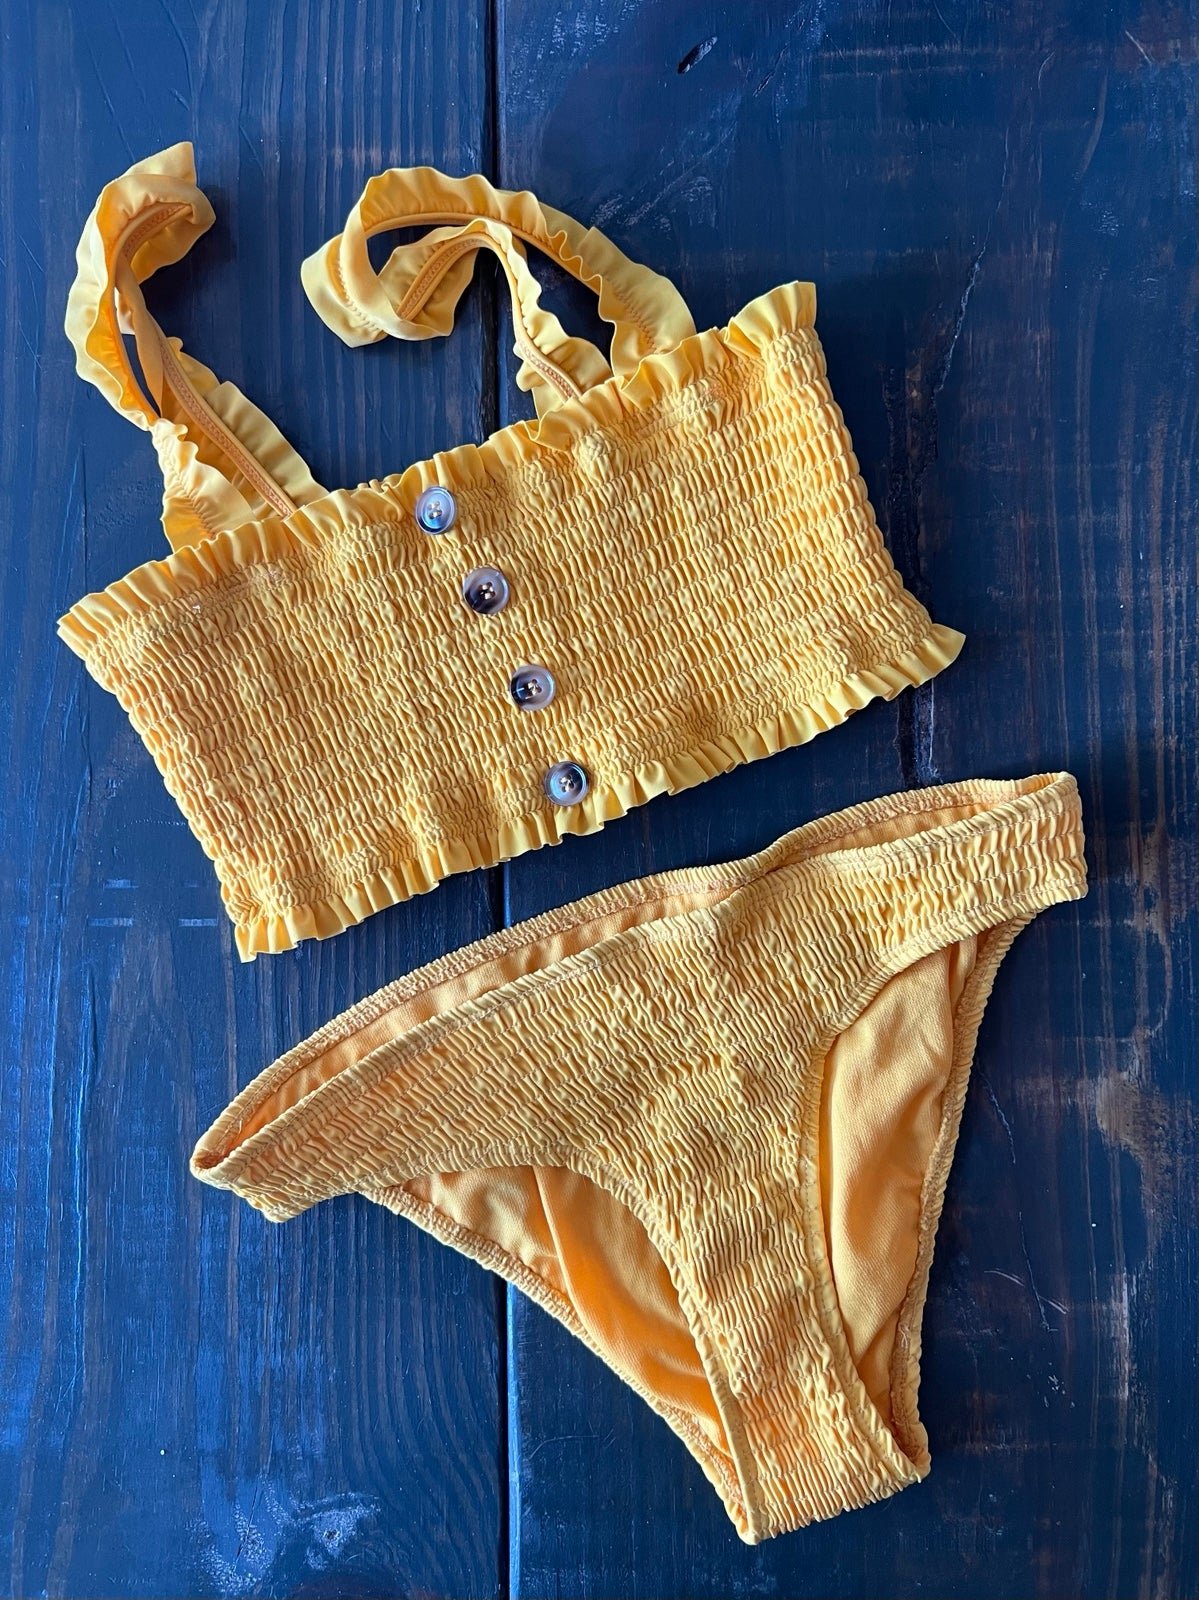 cheapest place to buy  NWOT yellow bikini, size Large LPn08FVXw Outlet Store